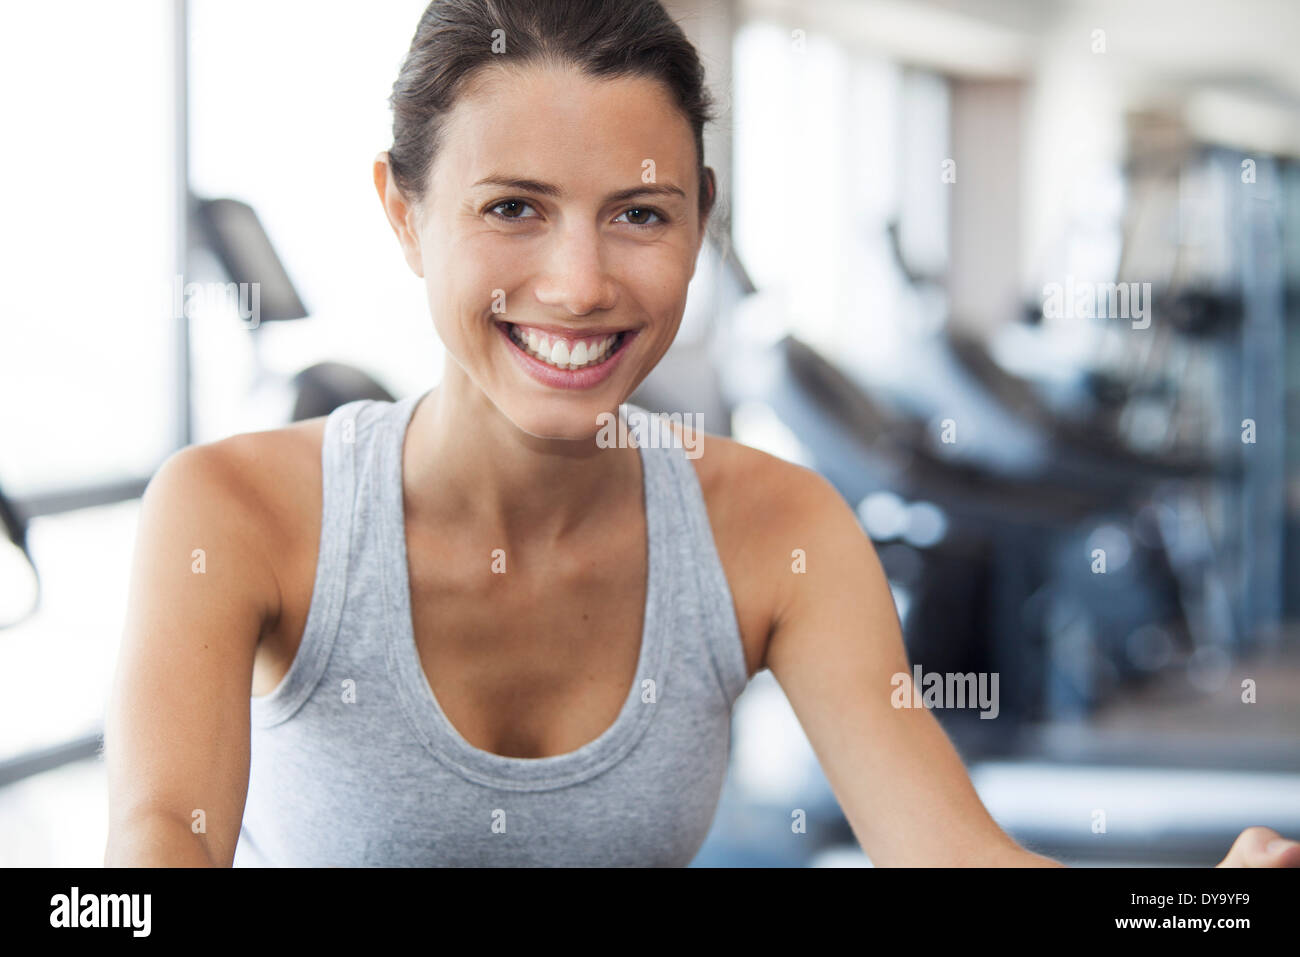 Young woman using exercise machine at gym Stock Photo - Alamy